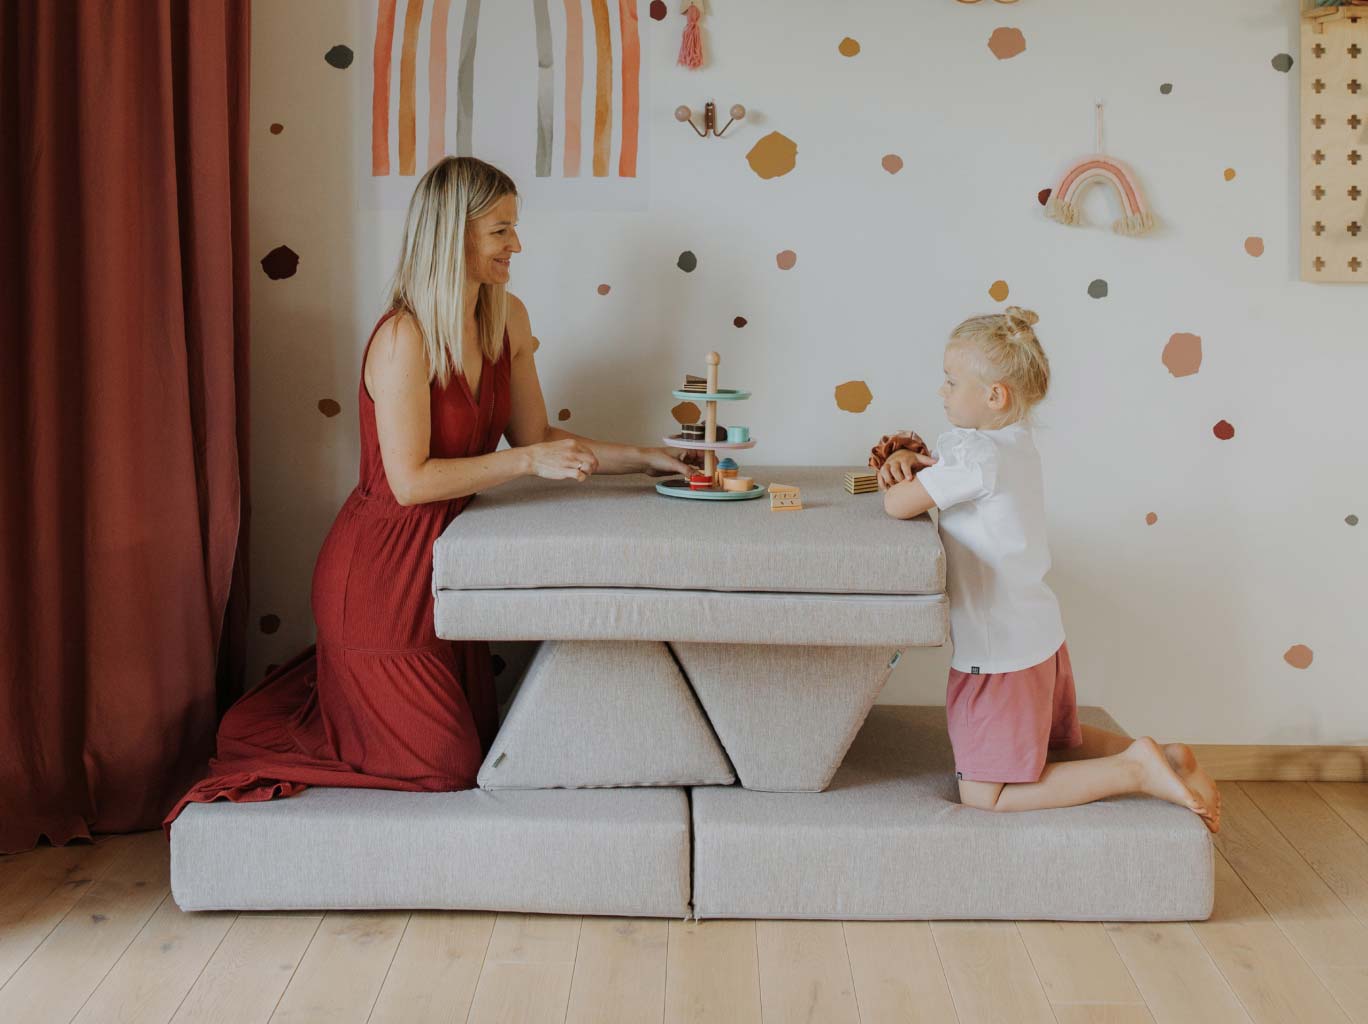 Mommy and daughter playing tea time on their Monboxy play sofa